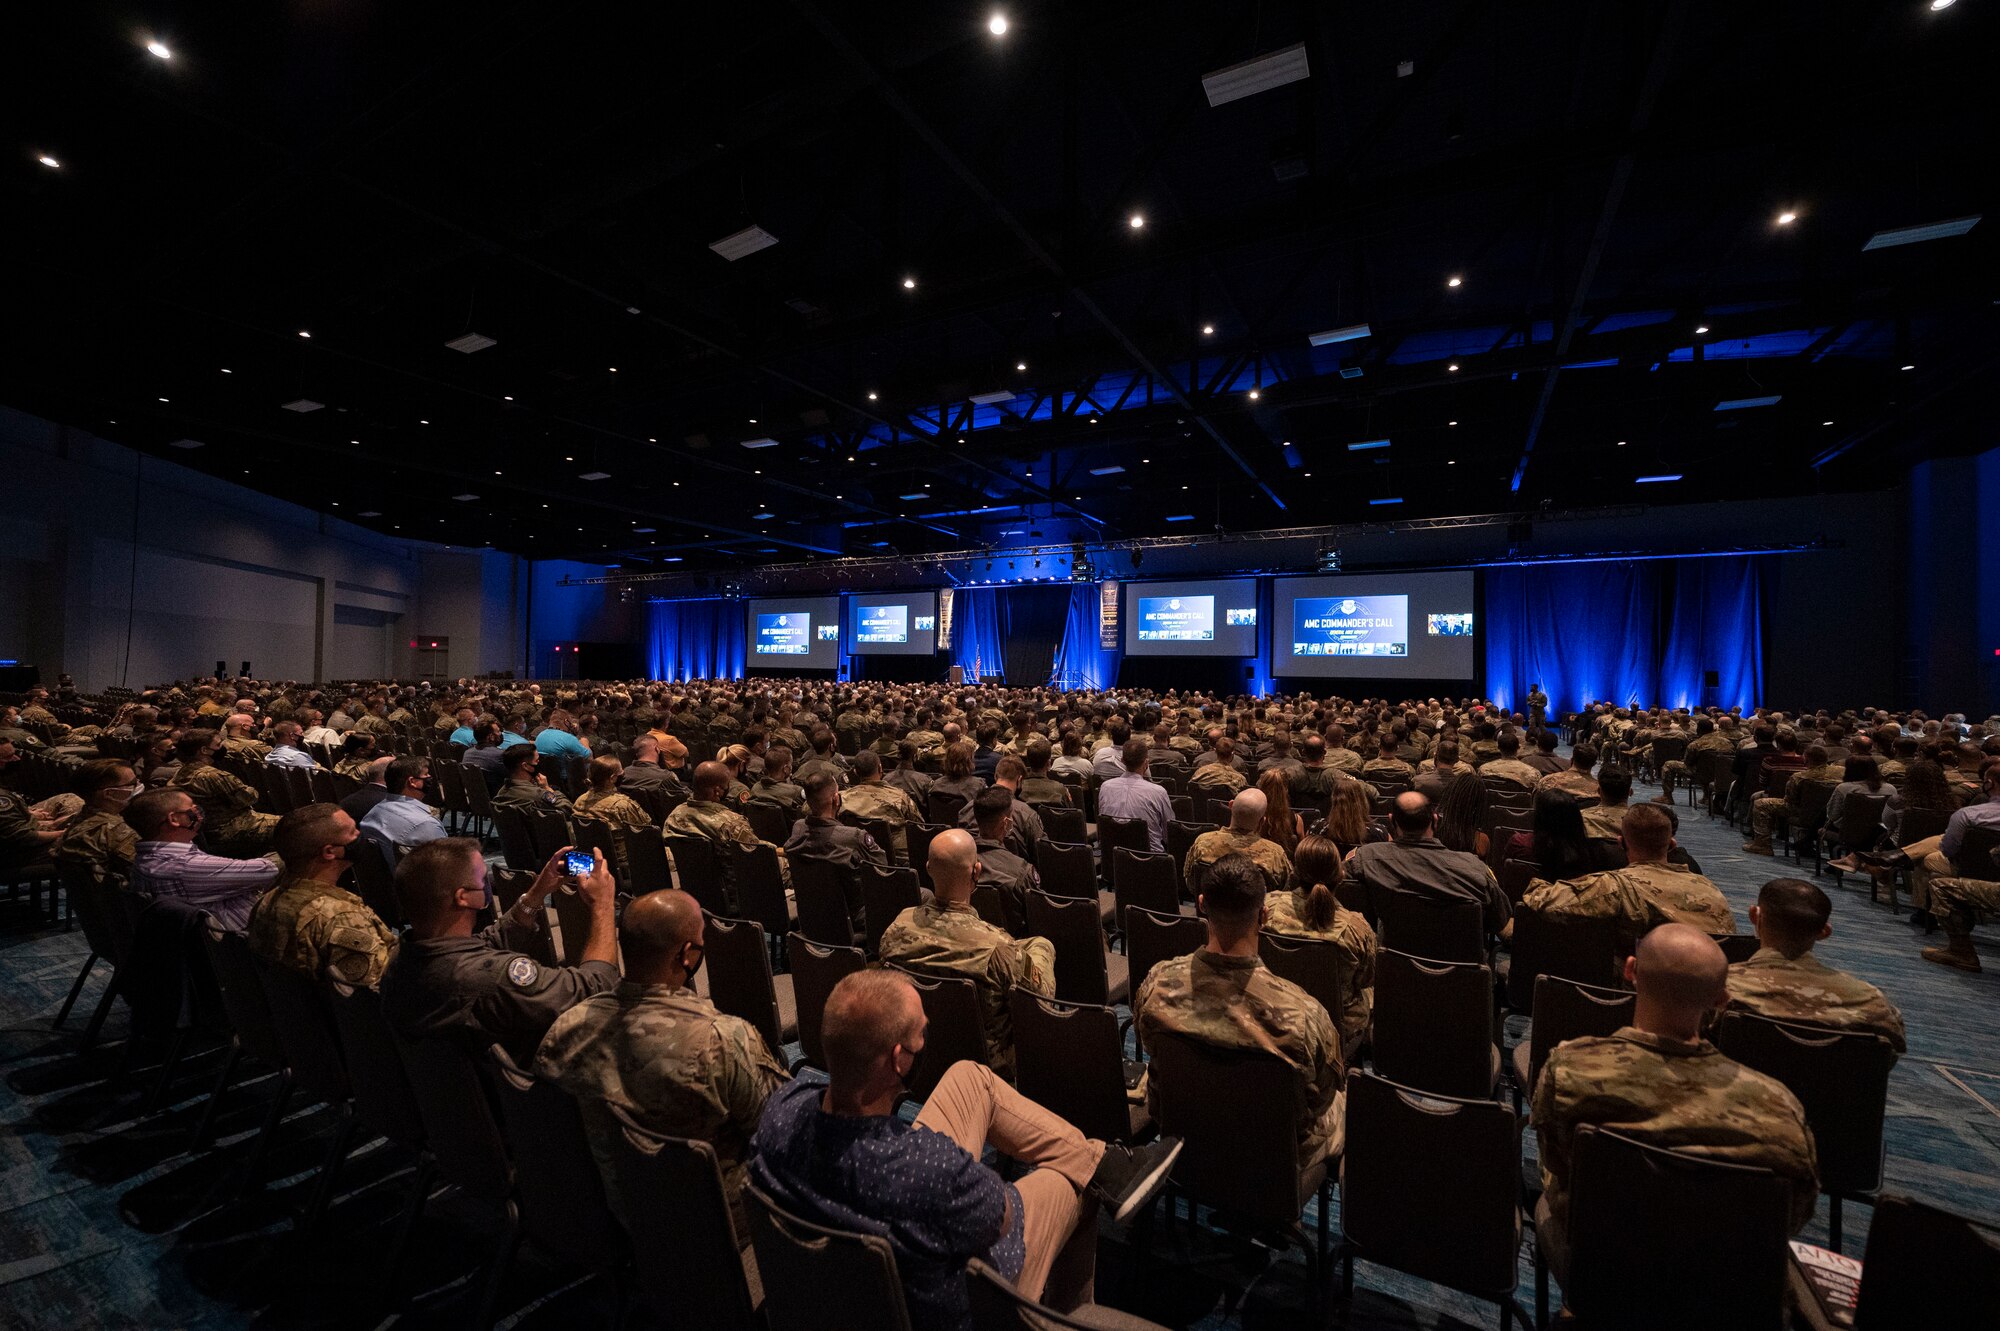 U.S. Air Force airmen attend Air Mobility Command commander Gen. Mike Minihan’s keynote speech during the 53rd Airlift/Tanker Association Convention in Orlando, Florida, Oct. 28th, 2021.